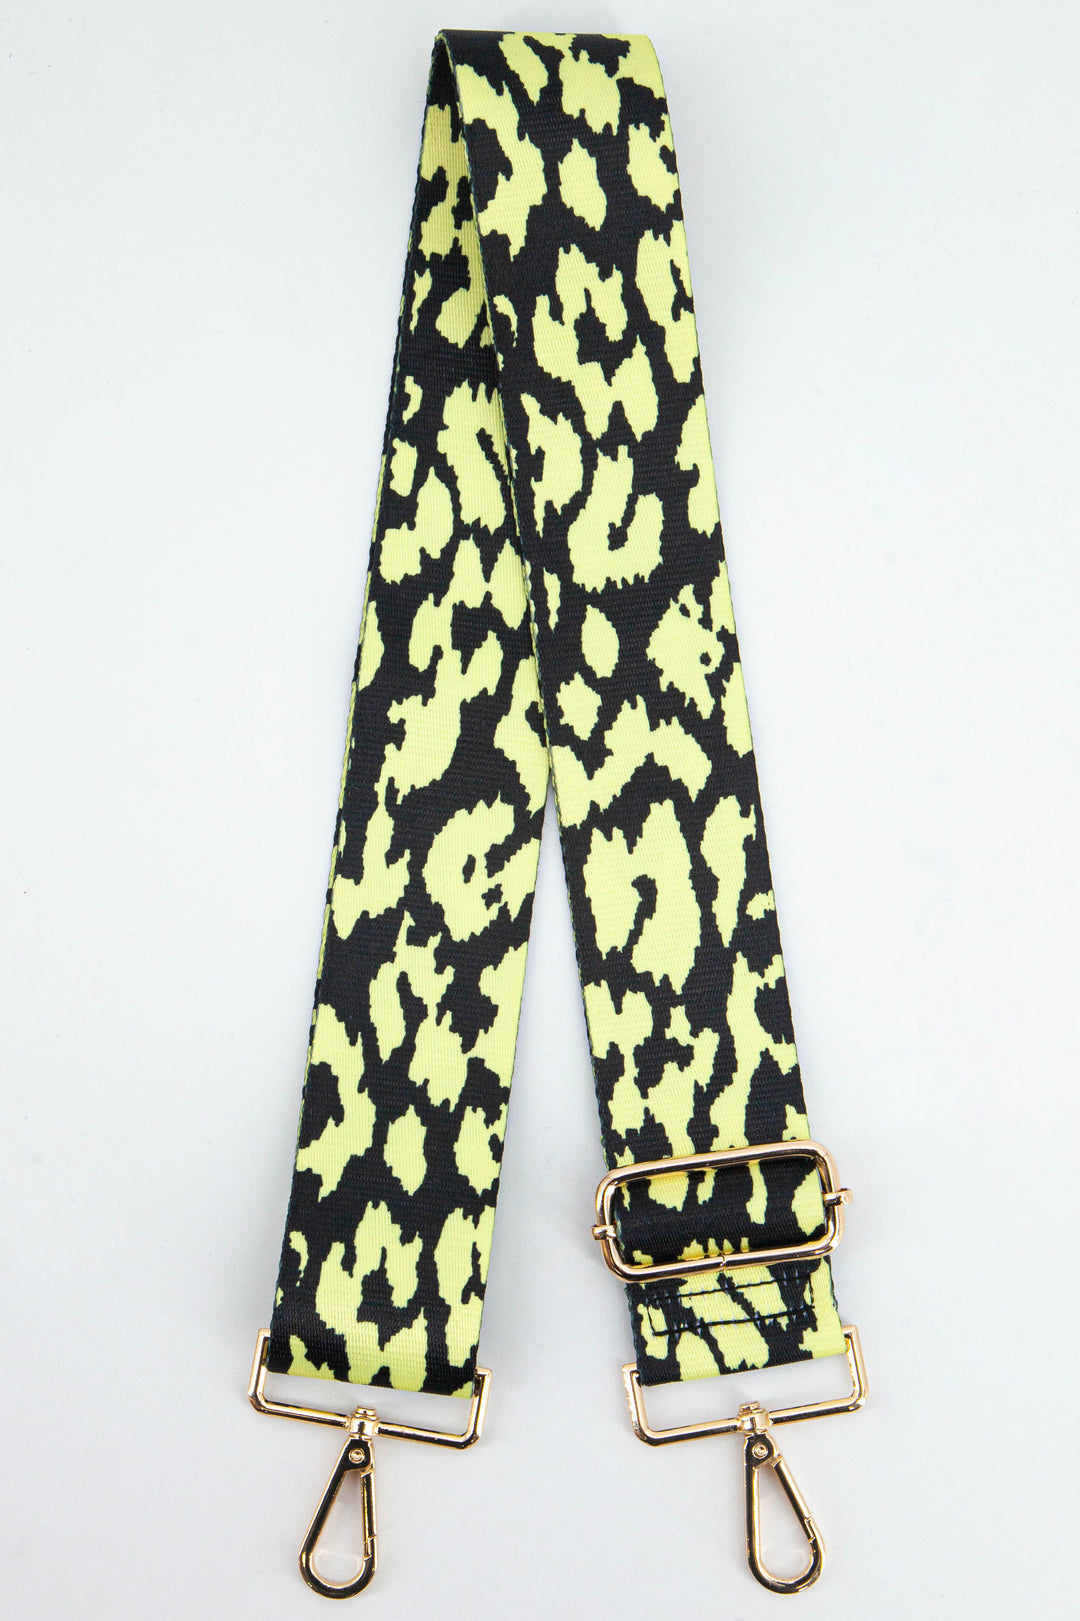 neon yellow and black animal print bag strap with gold clip on snap hooks and adjustable buckle